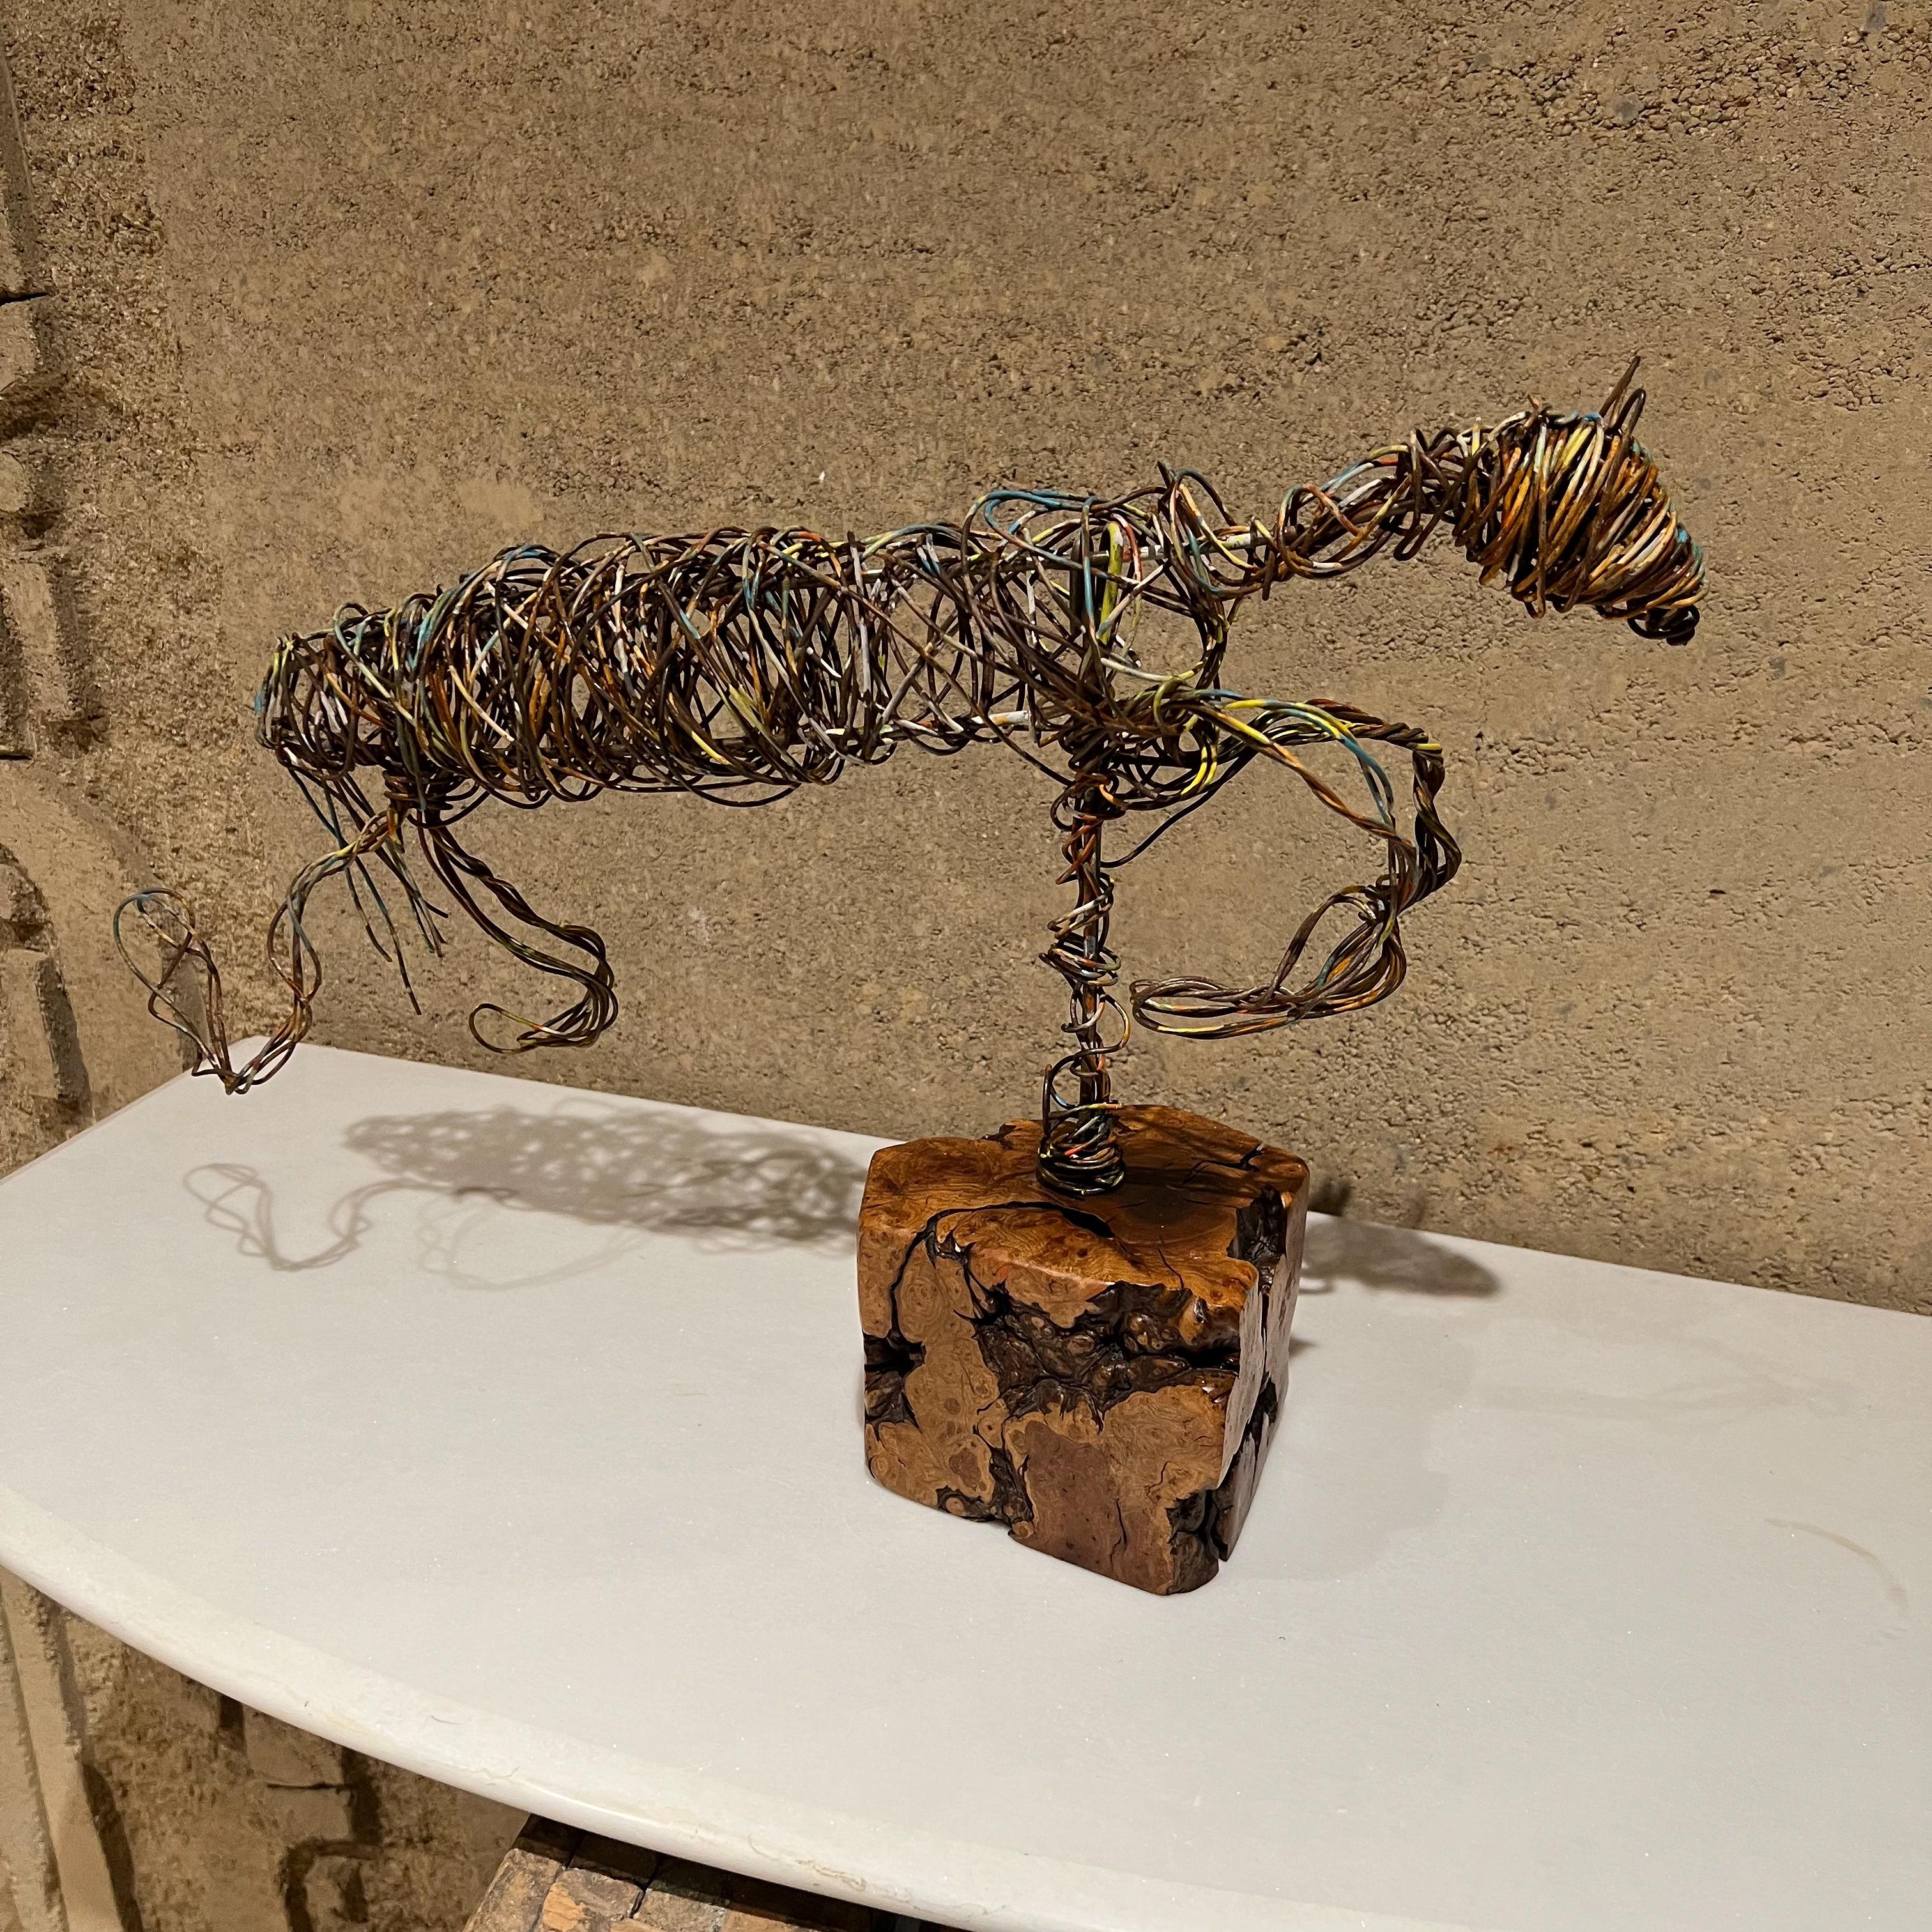 Sculpture
Modernist Art wire horse sculpture, painted, mounted on an Exotic Wood base.
In the style of Marcello Fantoni for Raymor
Measures: 12.25 tall x 5 wide x 18.5 long
Preowned original condition unrestored. 
Refer to images provided.
 